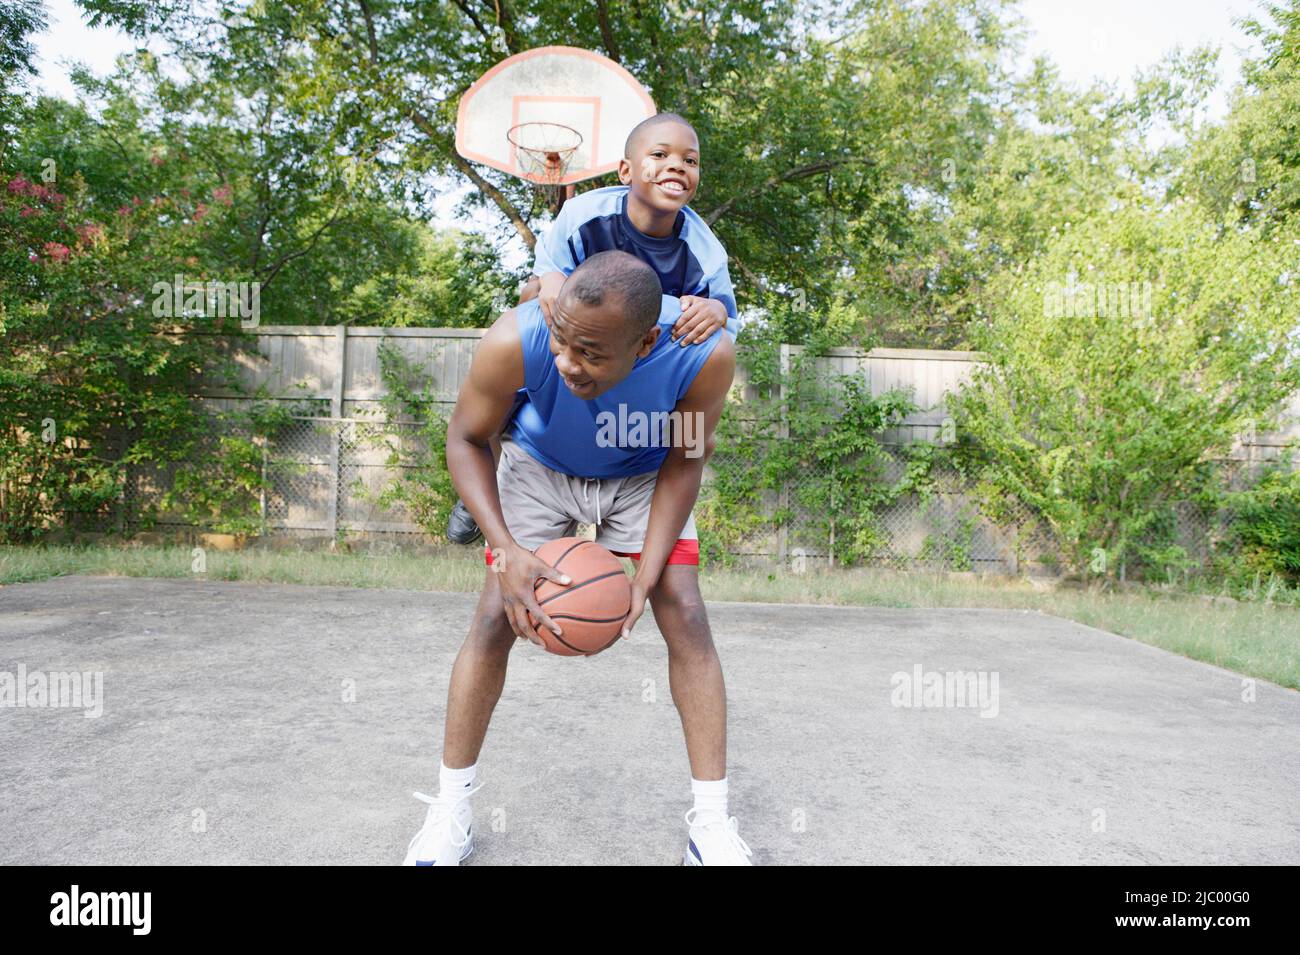 Father and son playing basketball Stock Photo